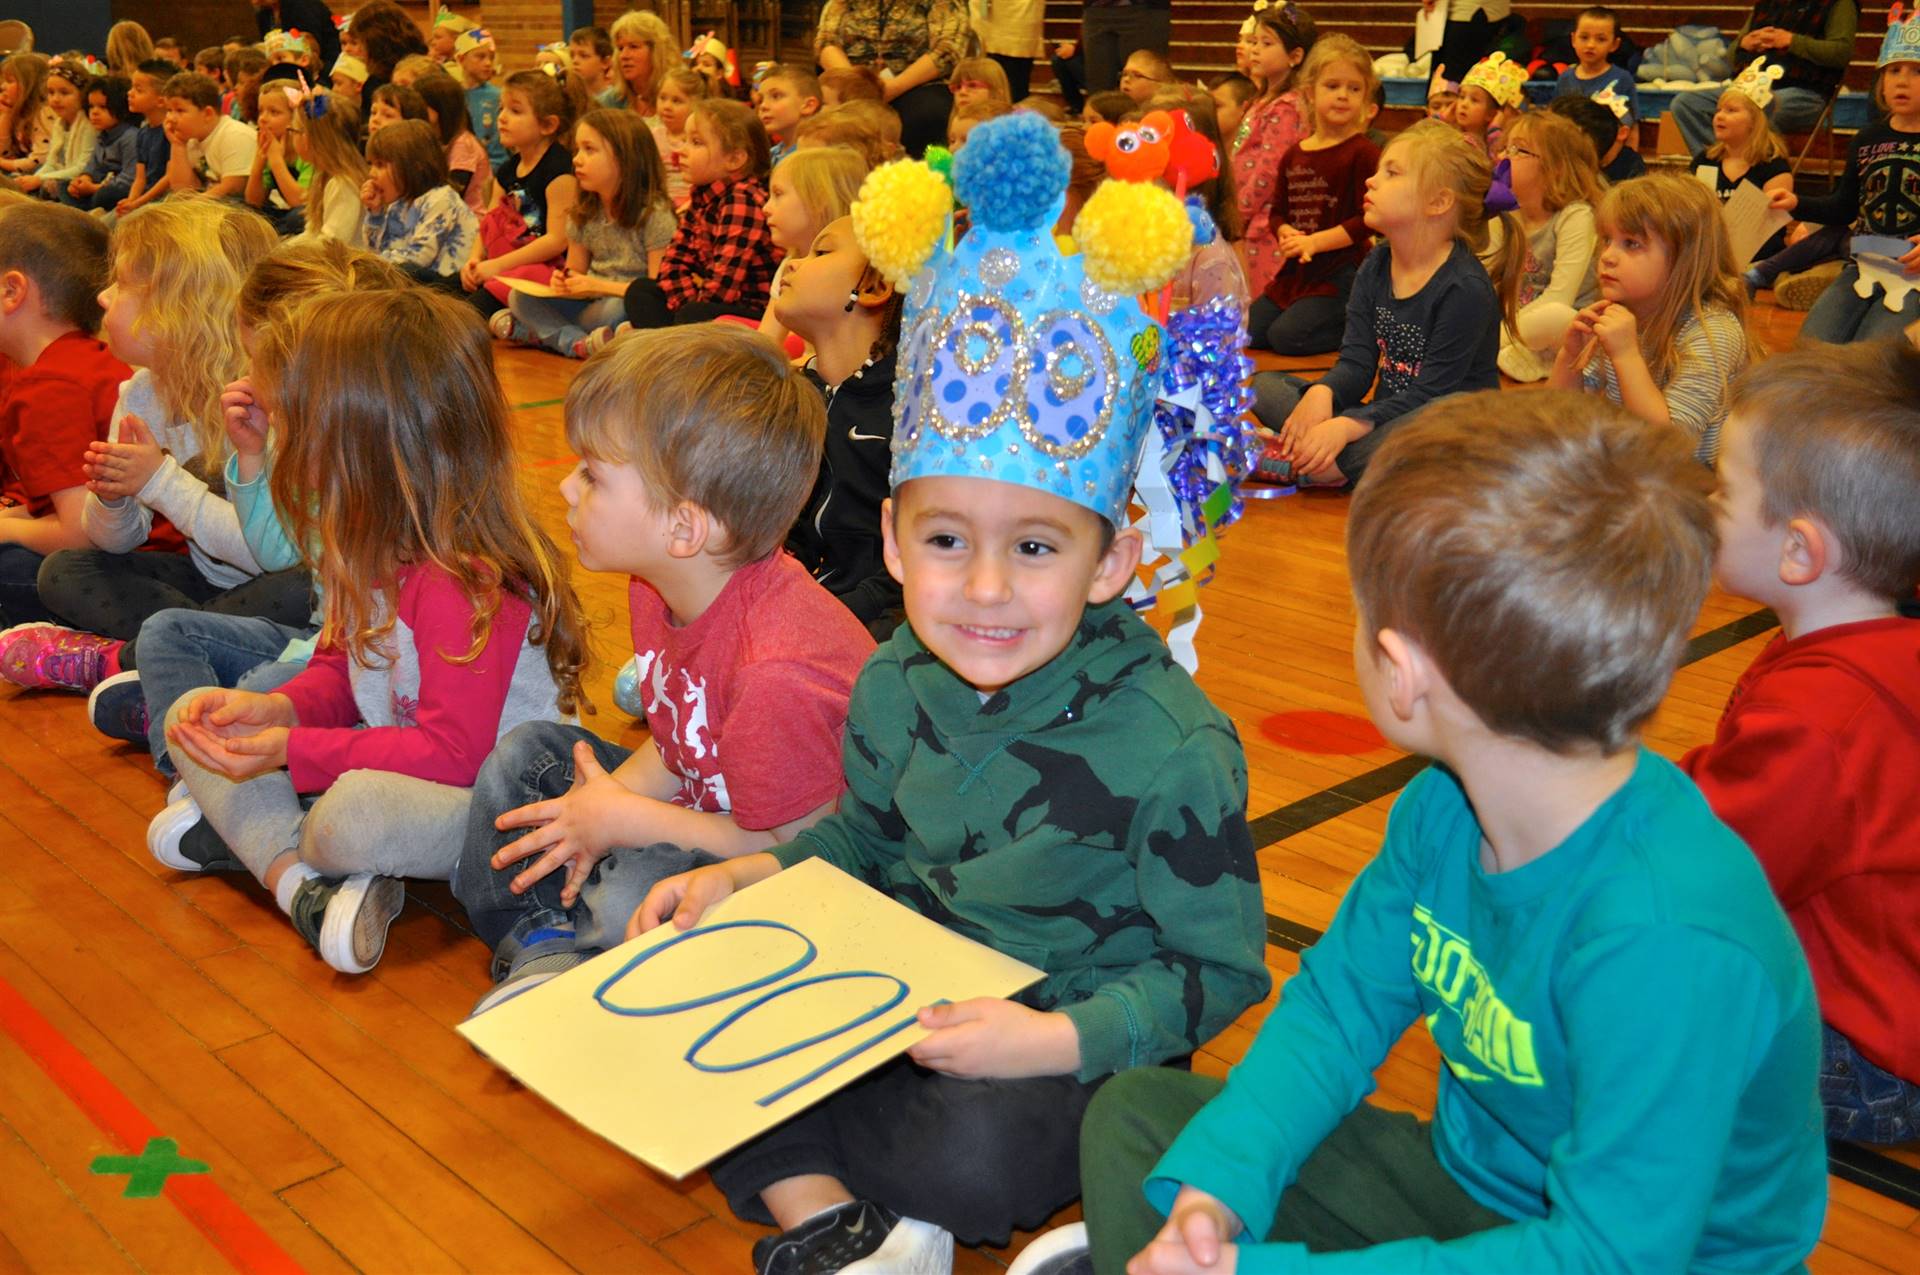 100th student and audience on 100th day celebration.